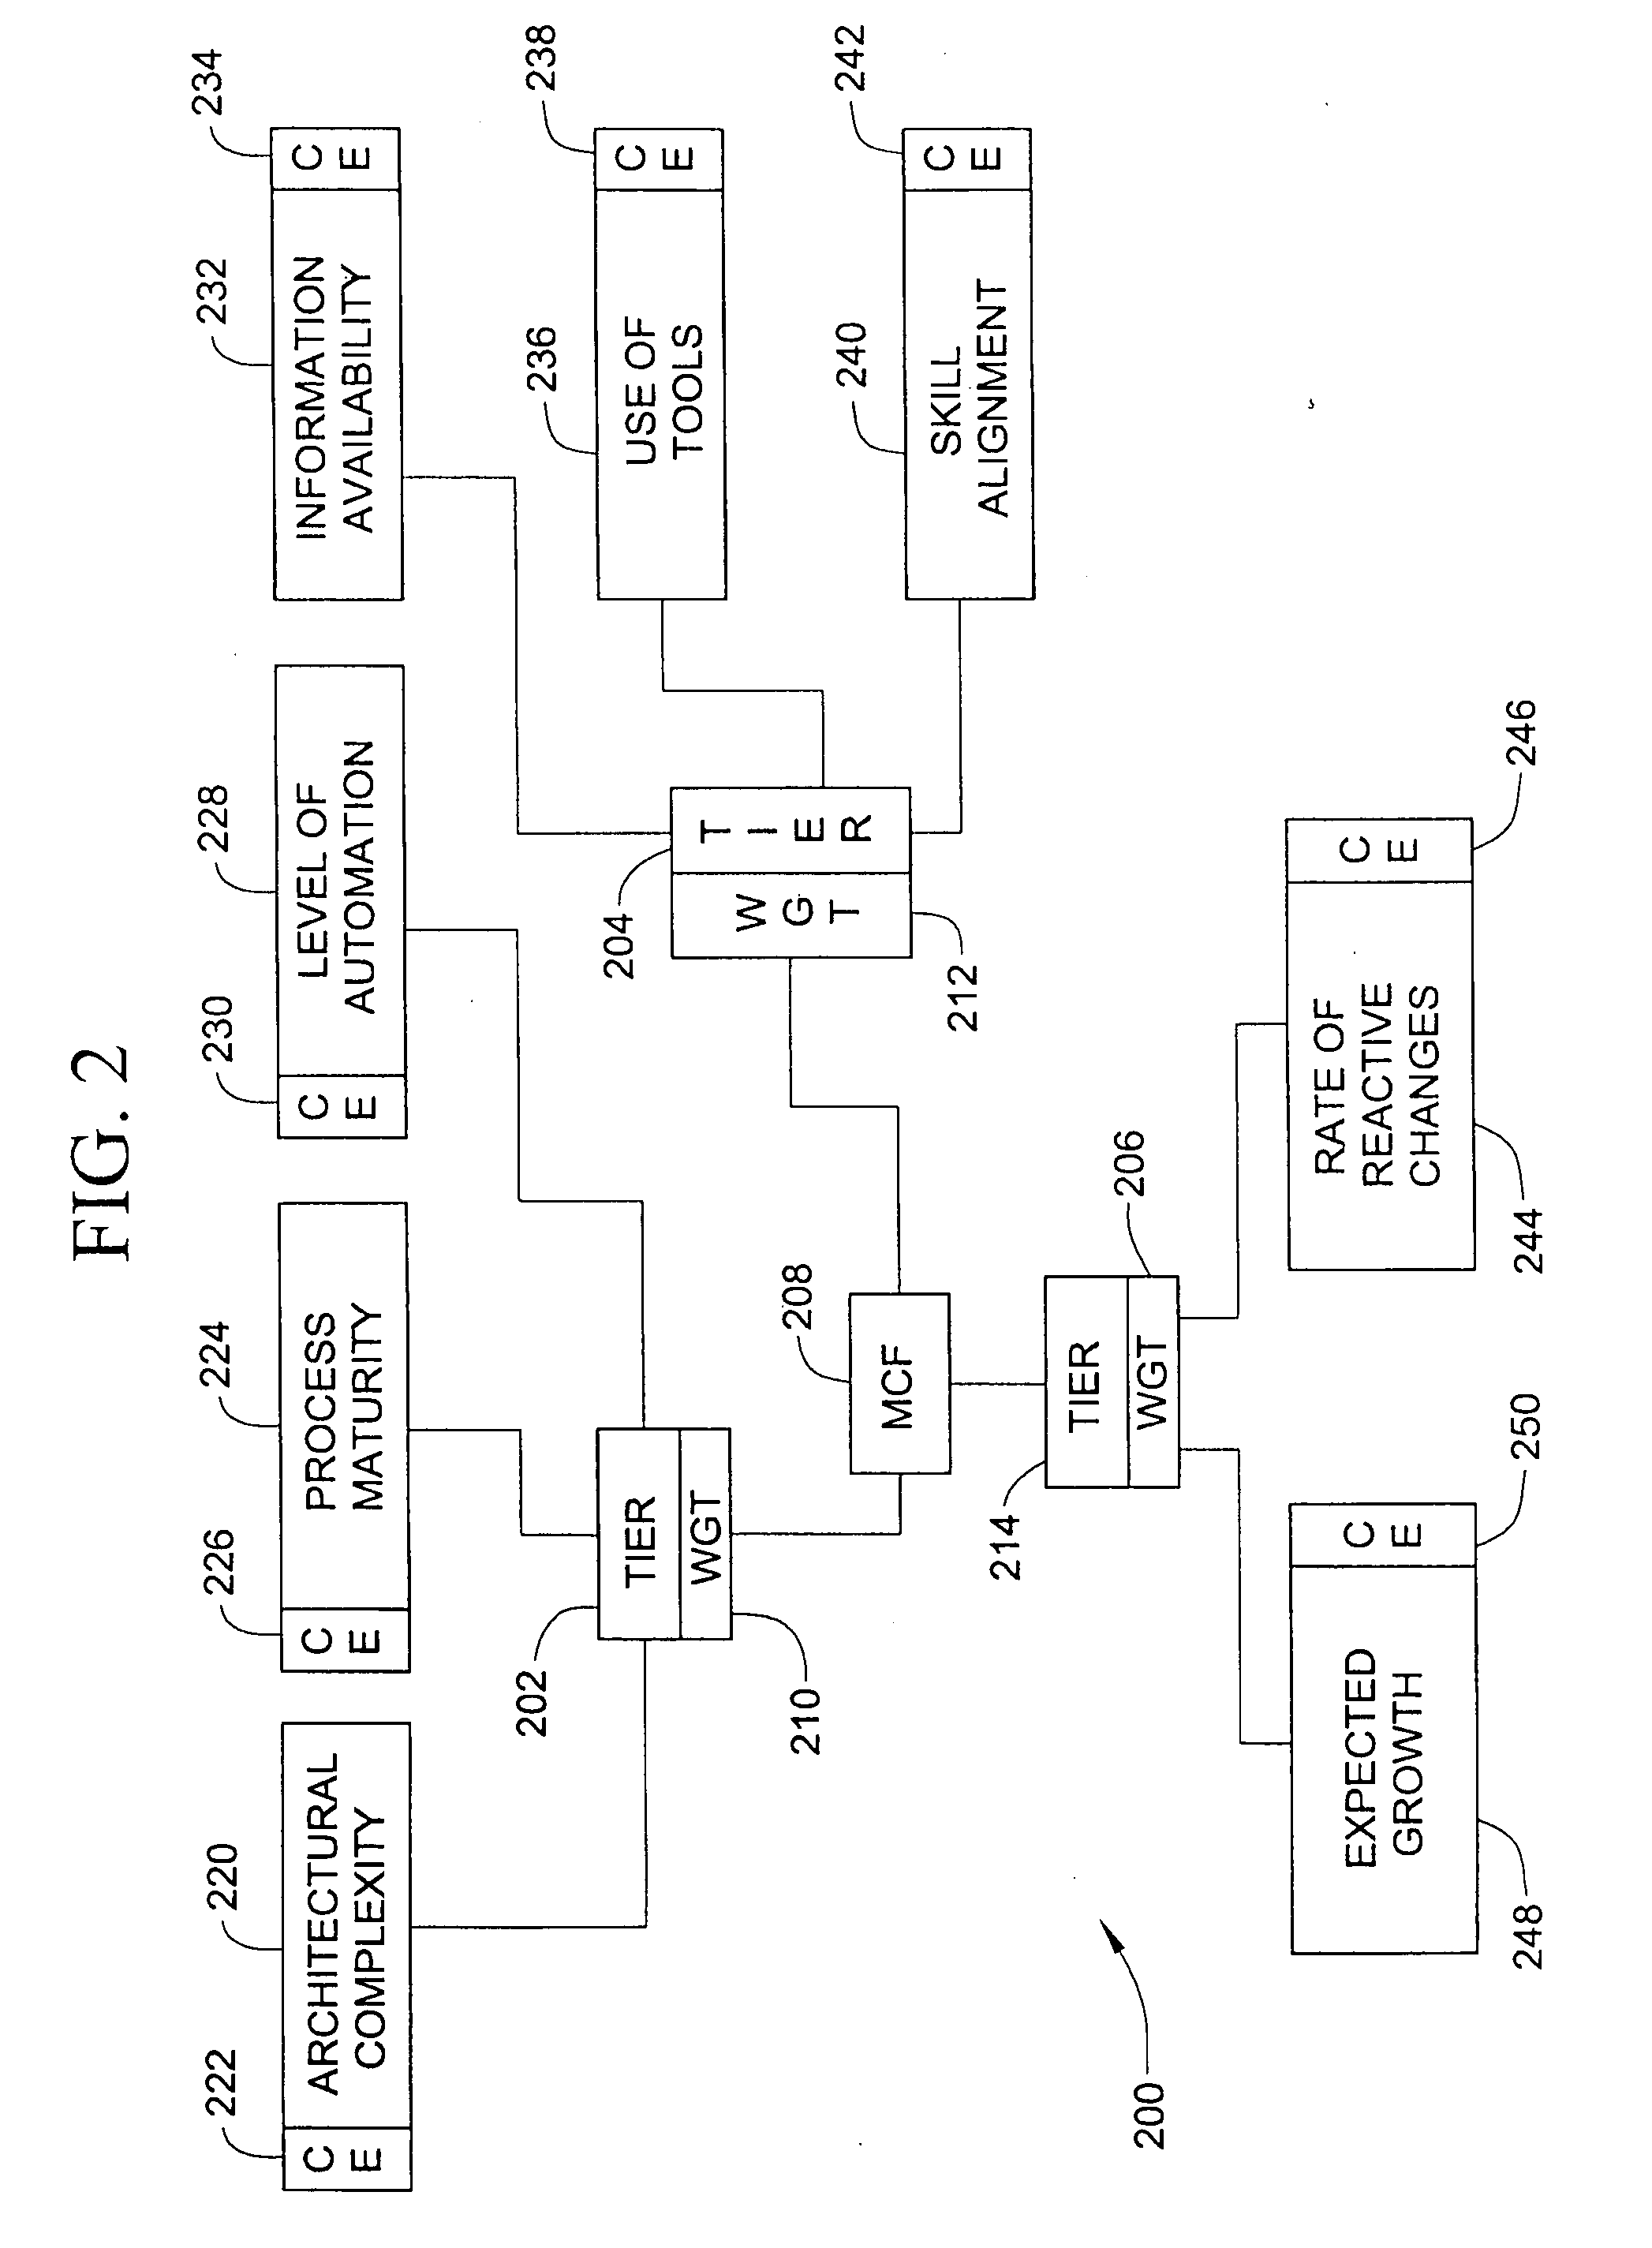 Method and system for determining a management complexity factor for delivering services in an environment